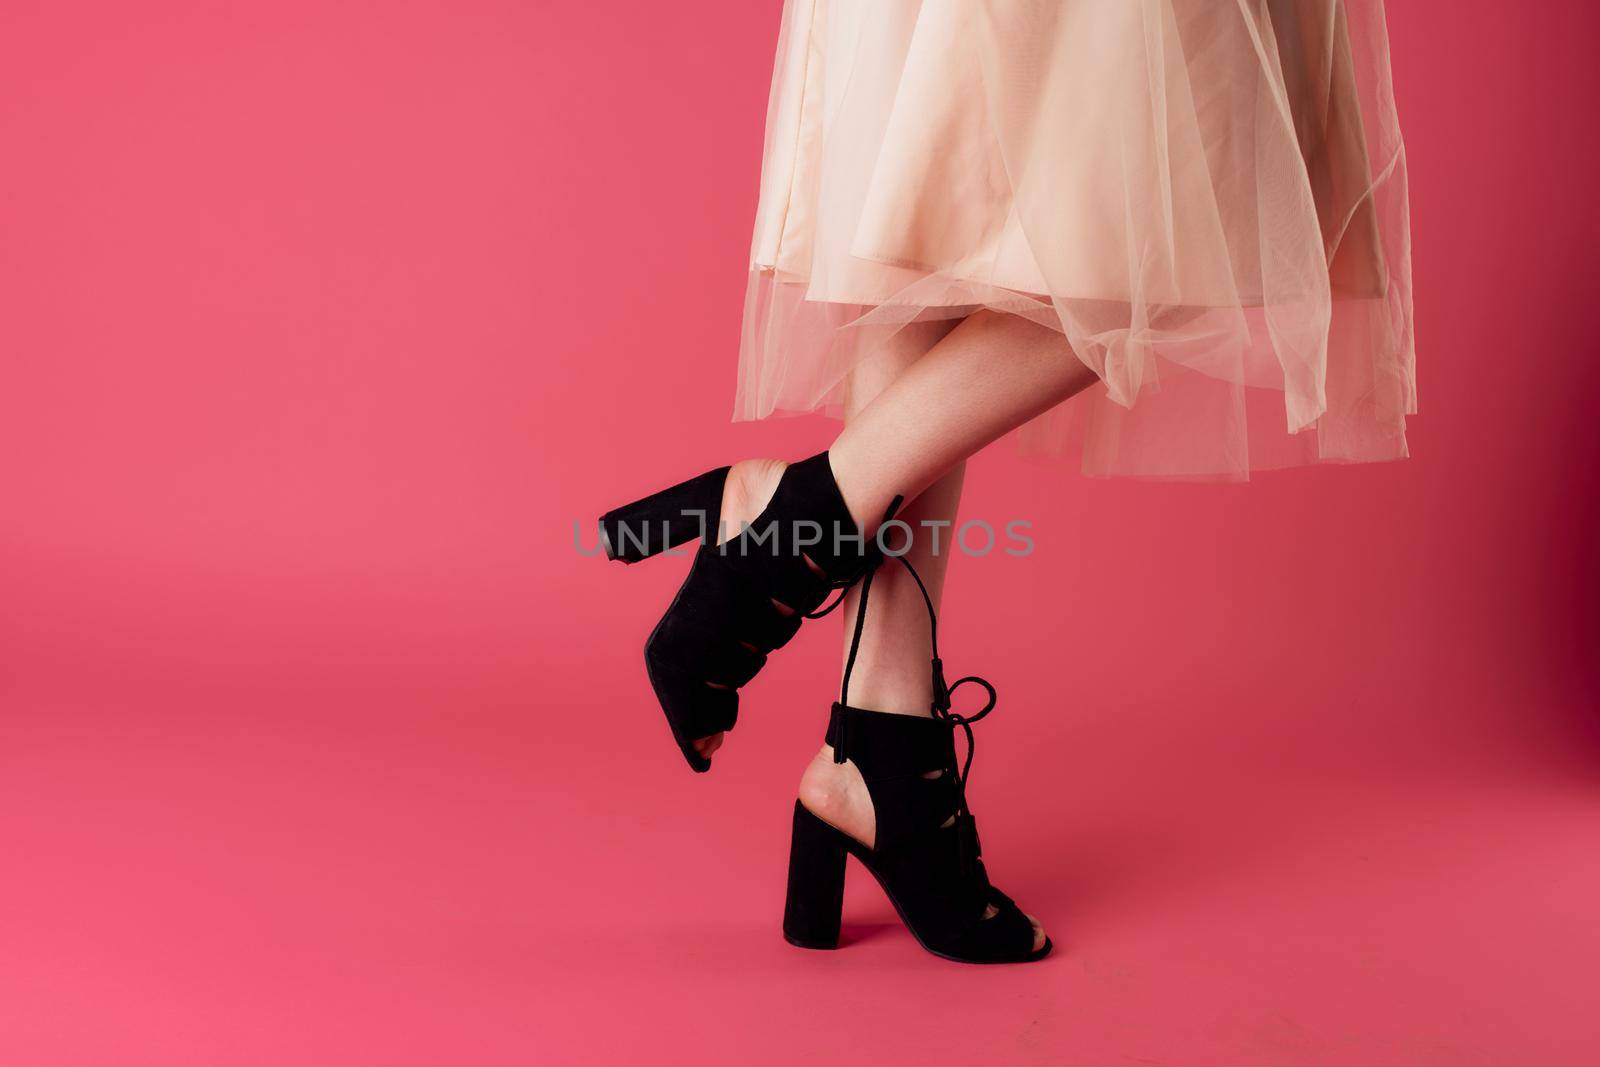 Womens feet fashionable shoes charm pink background shopping. High quality photo